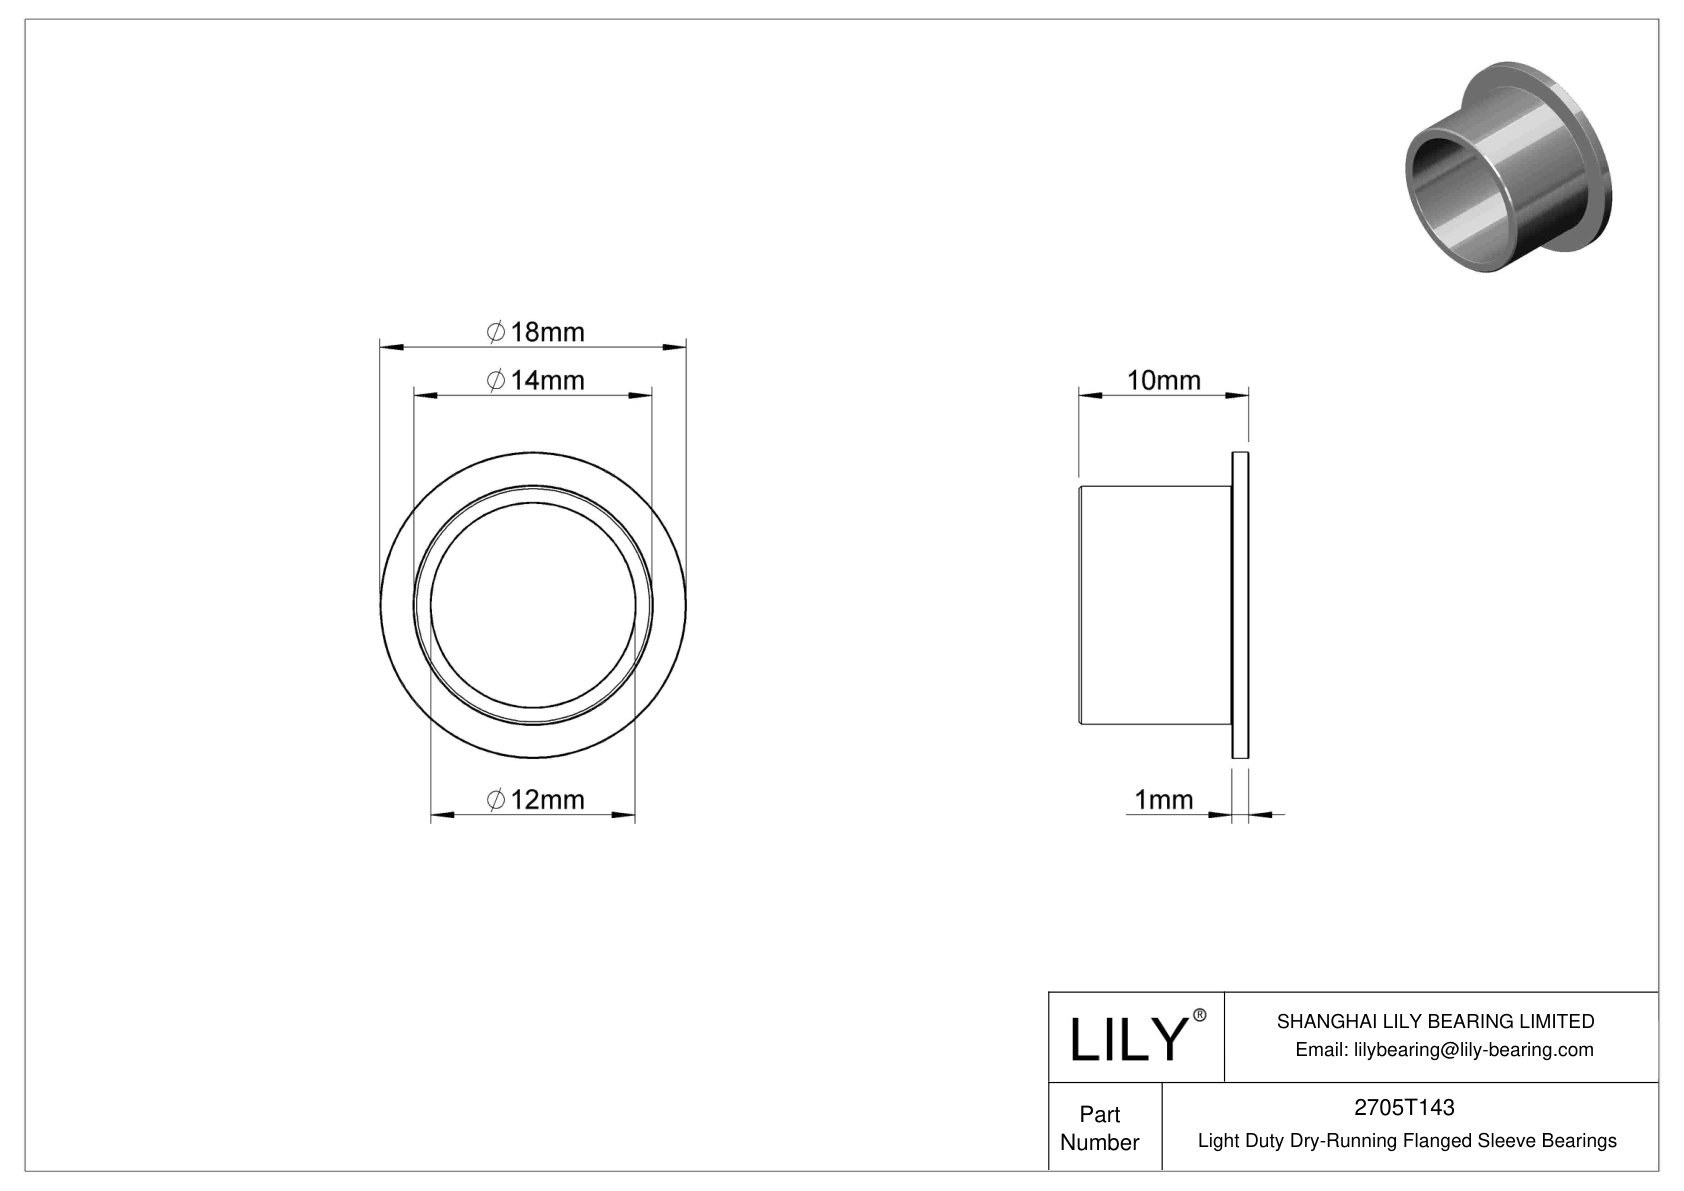 CHAFTBED Light Duty Dry-Running Flanged Sleeve Bearings cad drawing